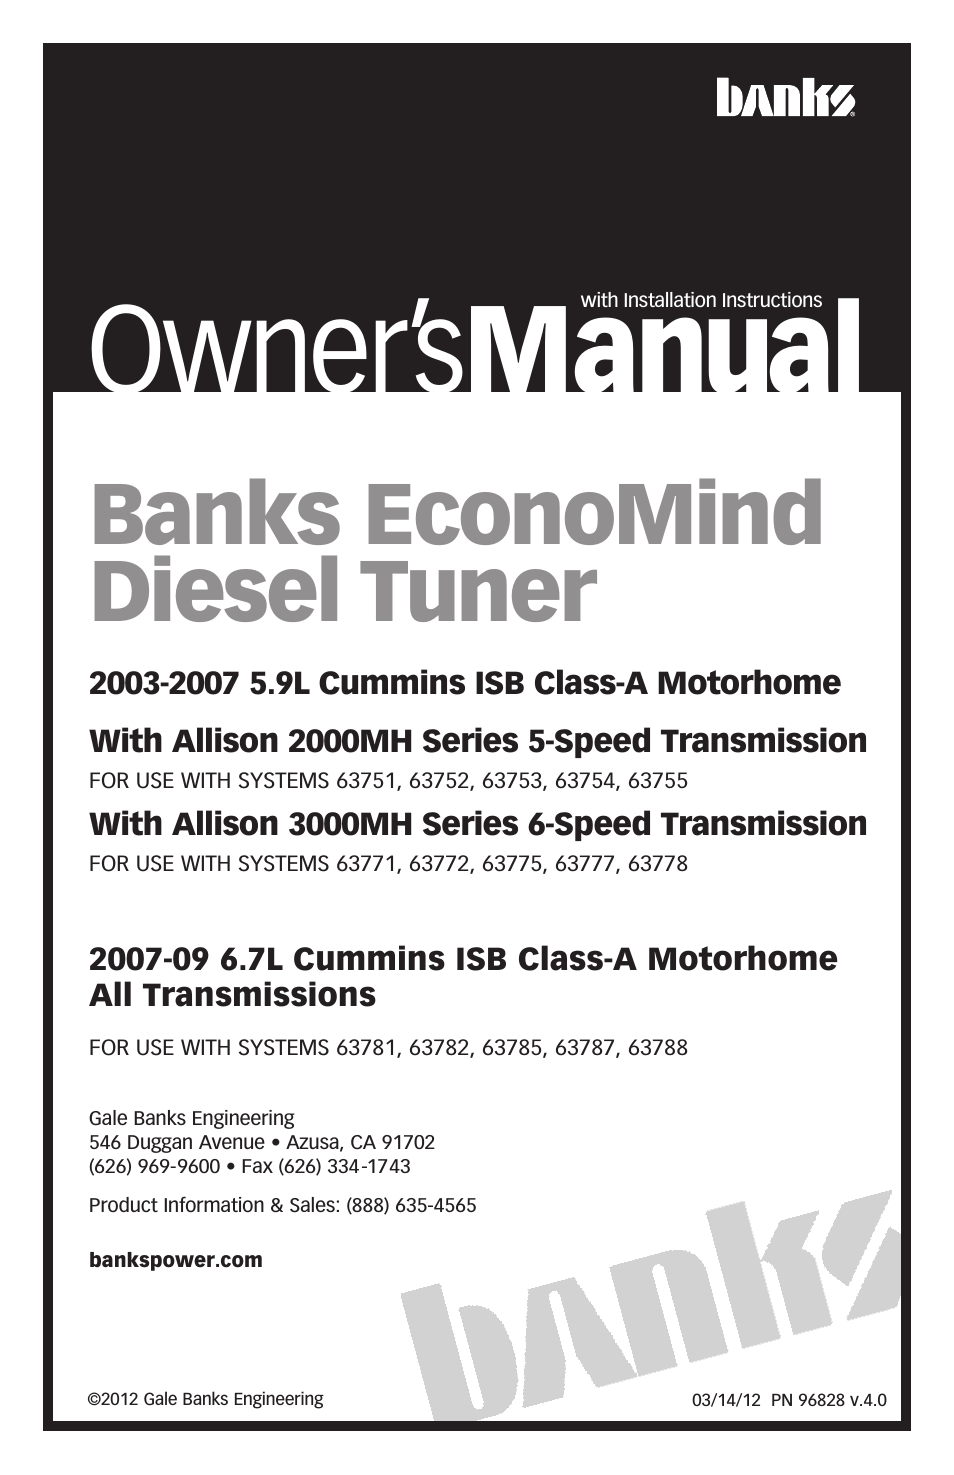 Cummins Motorhomes: (Diesel ’03 - 07 ISB-CR 5.9L) Power Pack with EconoMind and Banks iQ w_optional DynaFact Gauges 5.9L (Class-A w_Allison 2000-3000 Trans '03-07), 6.7L (Class-A, All Trans) '07-09